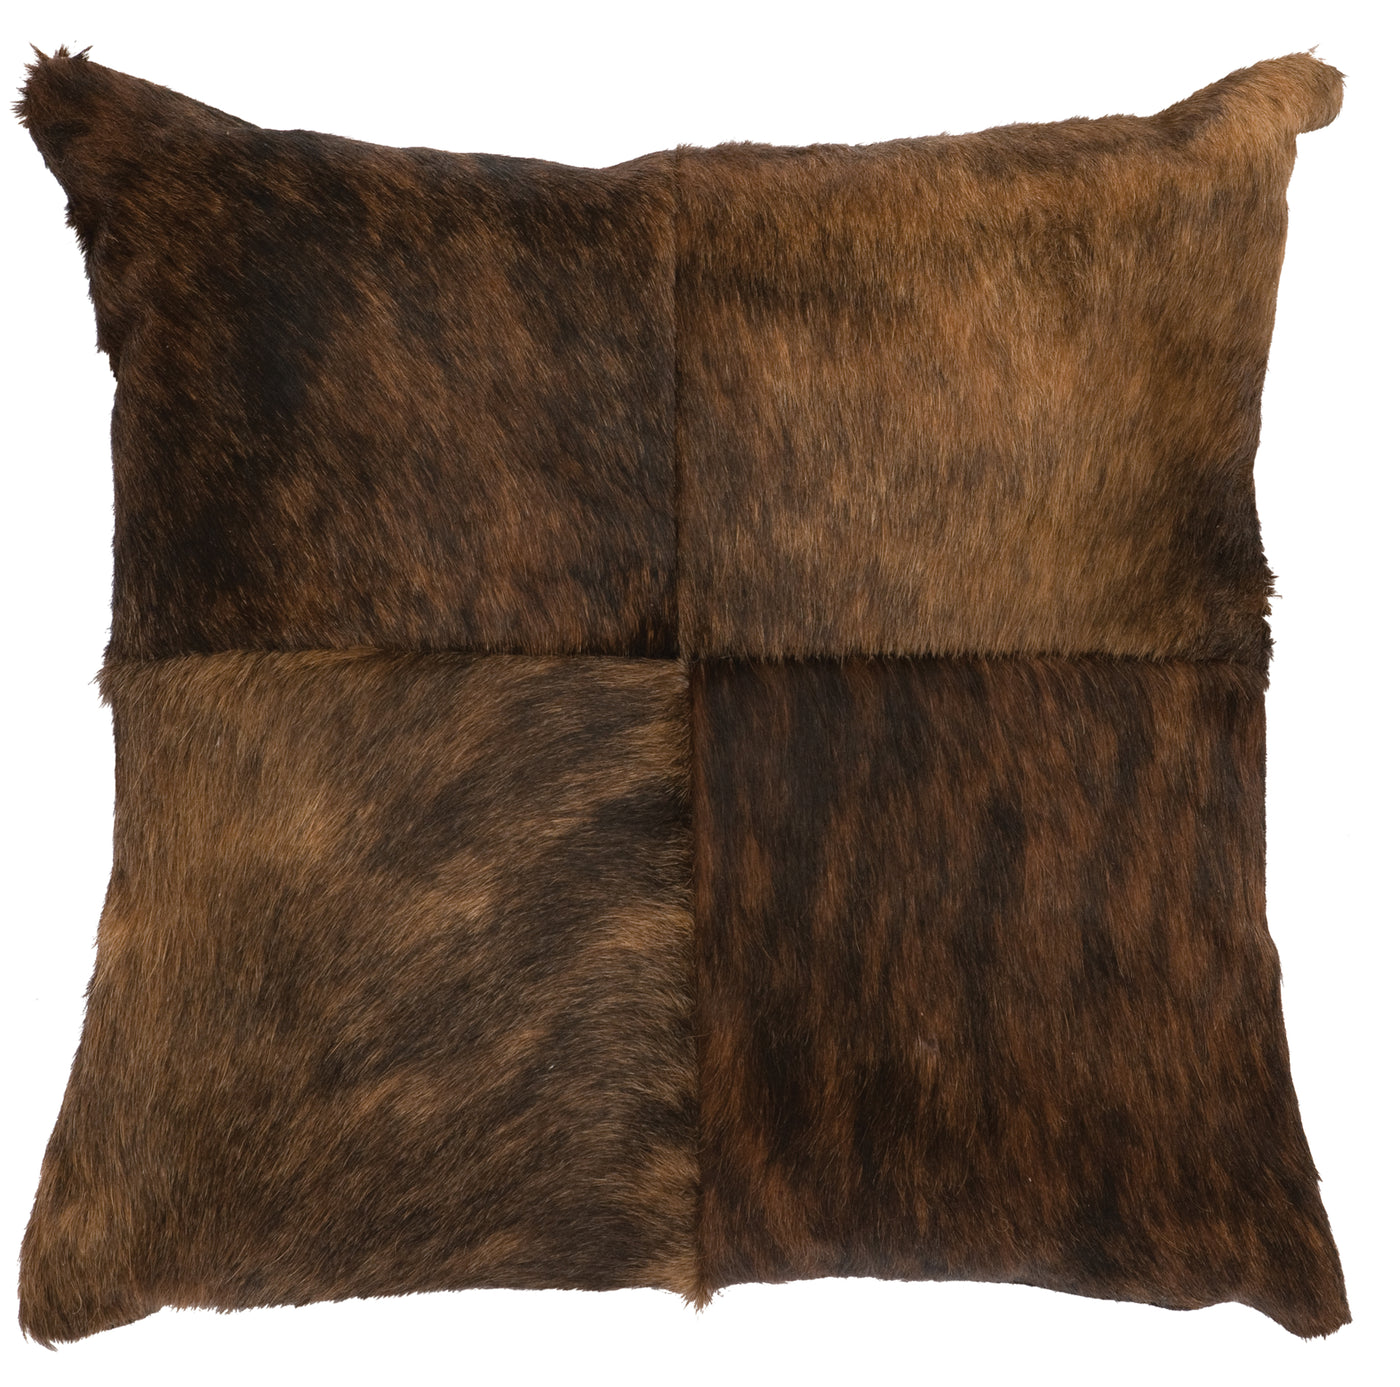 Canvello Dark Brindle Leather Pillow - Leather Back - 16"x16"